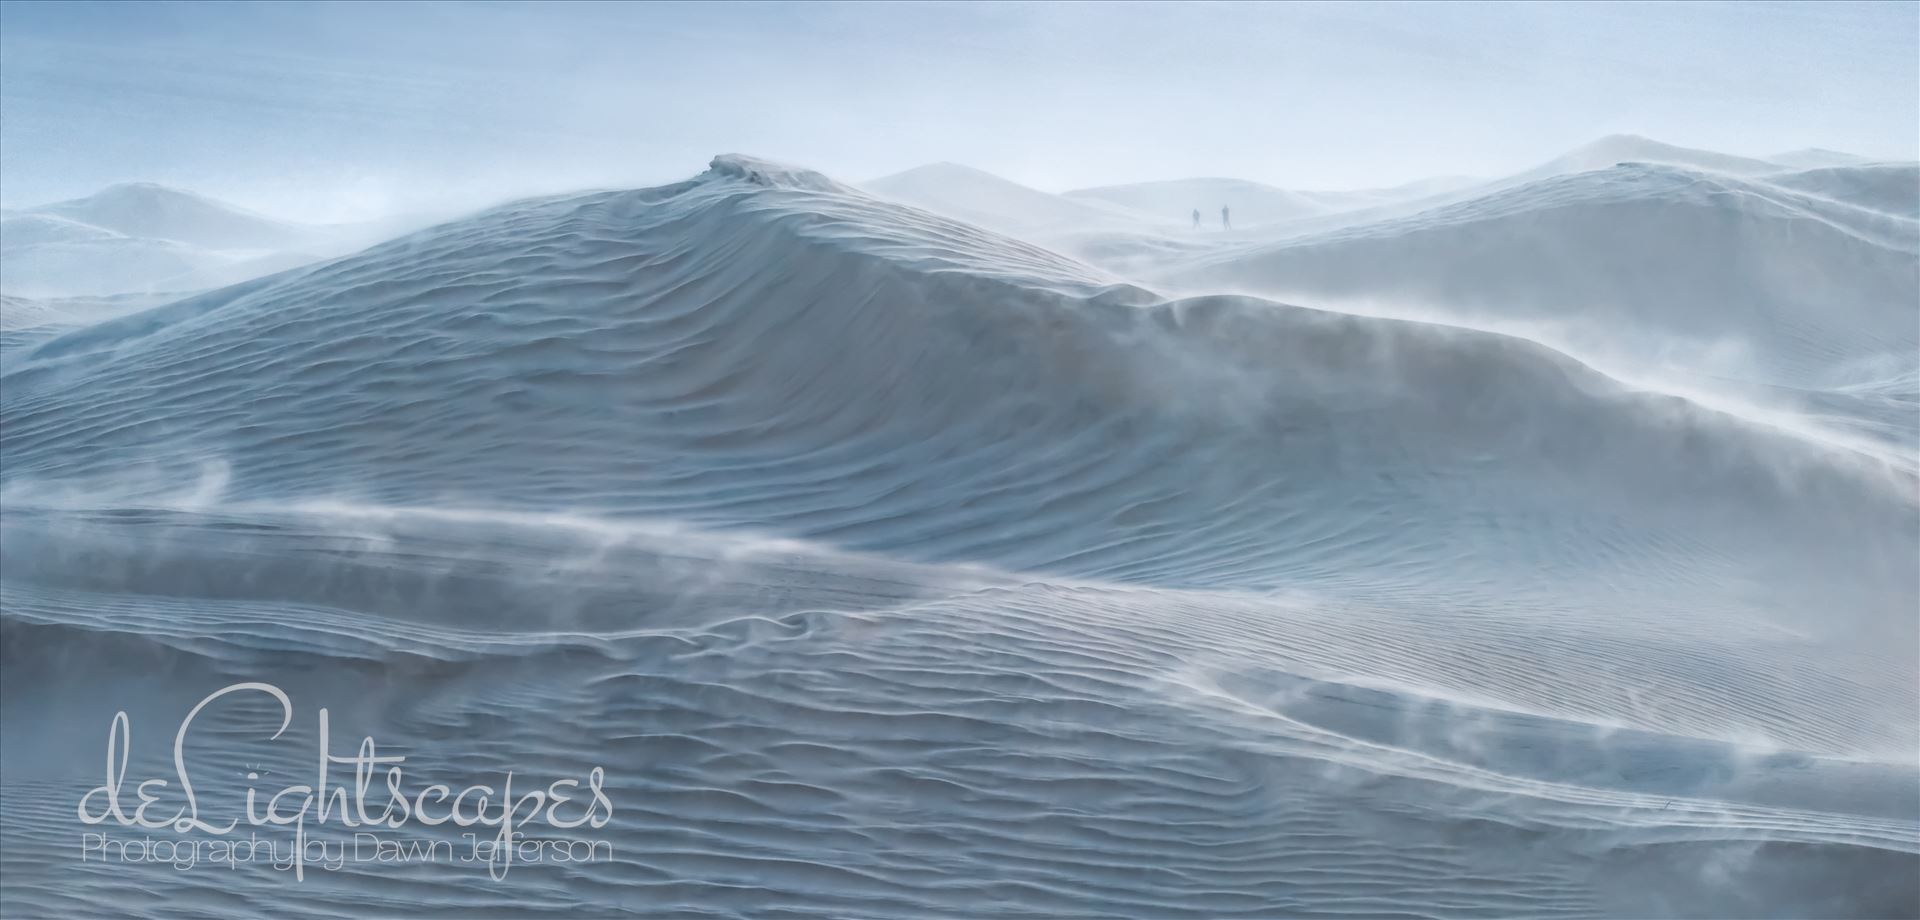 Rough Seas - Mesquite Dunes at blue hour during a wind storm with 30 mph sustained winds and 50-60 mph gusts. The dunes looked like a storm tossed sea especially the large dune which appears to be a cresting wave and the blowing sand is reminiscent of sea spray. by Dawn Jefferson